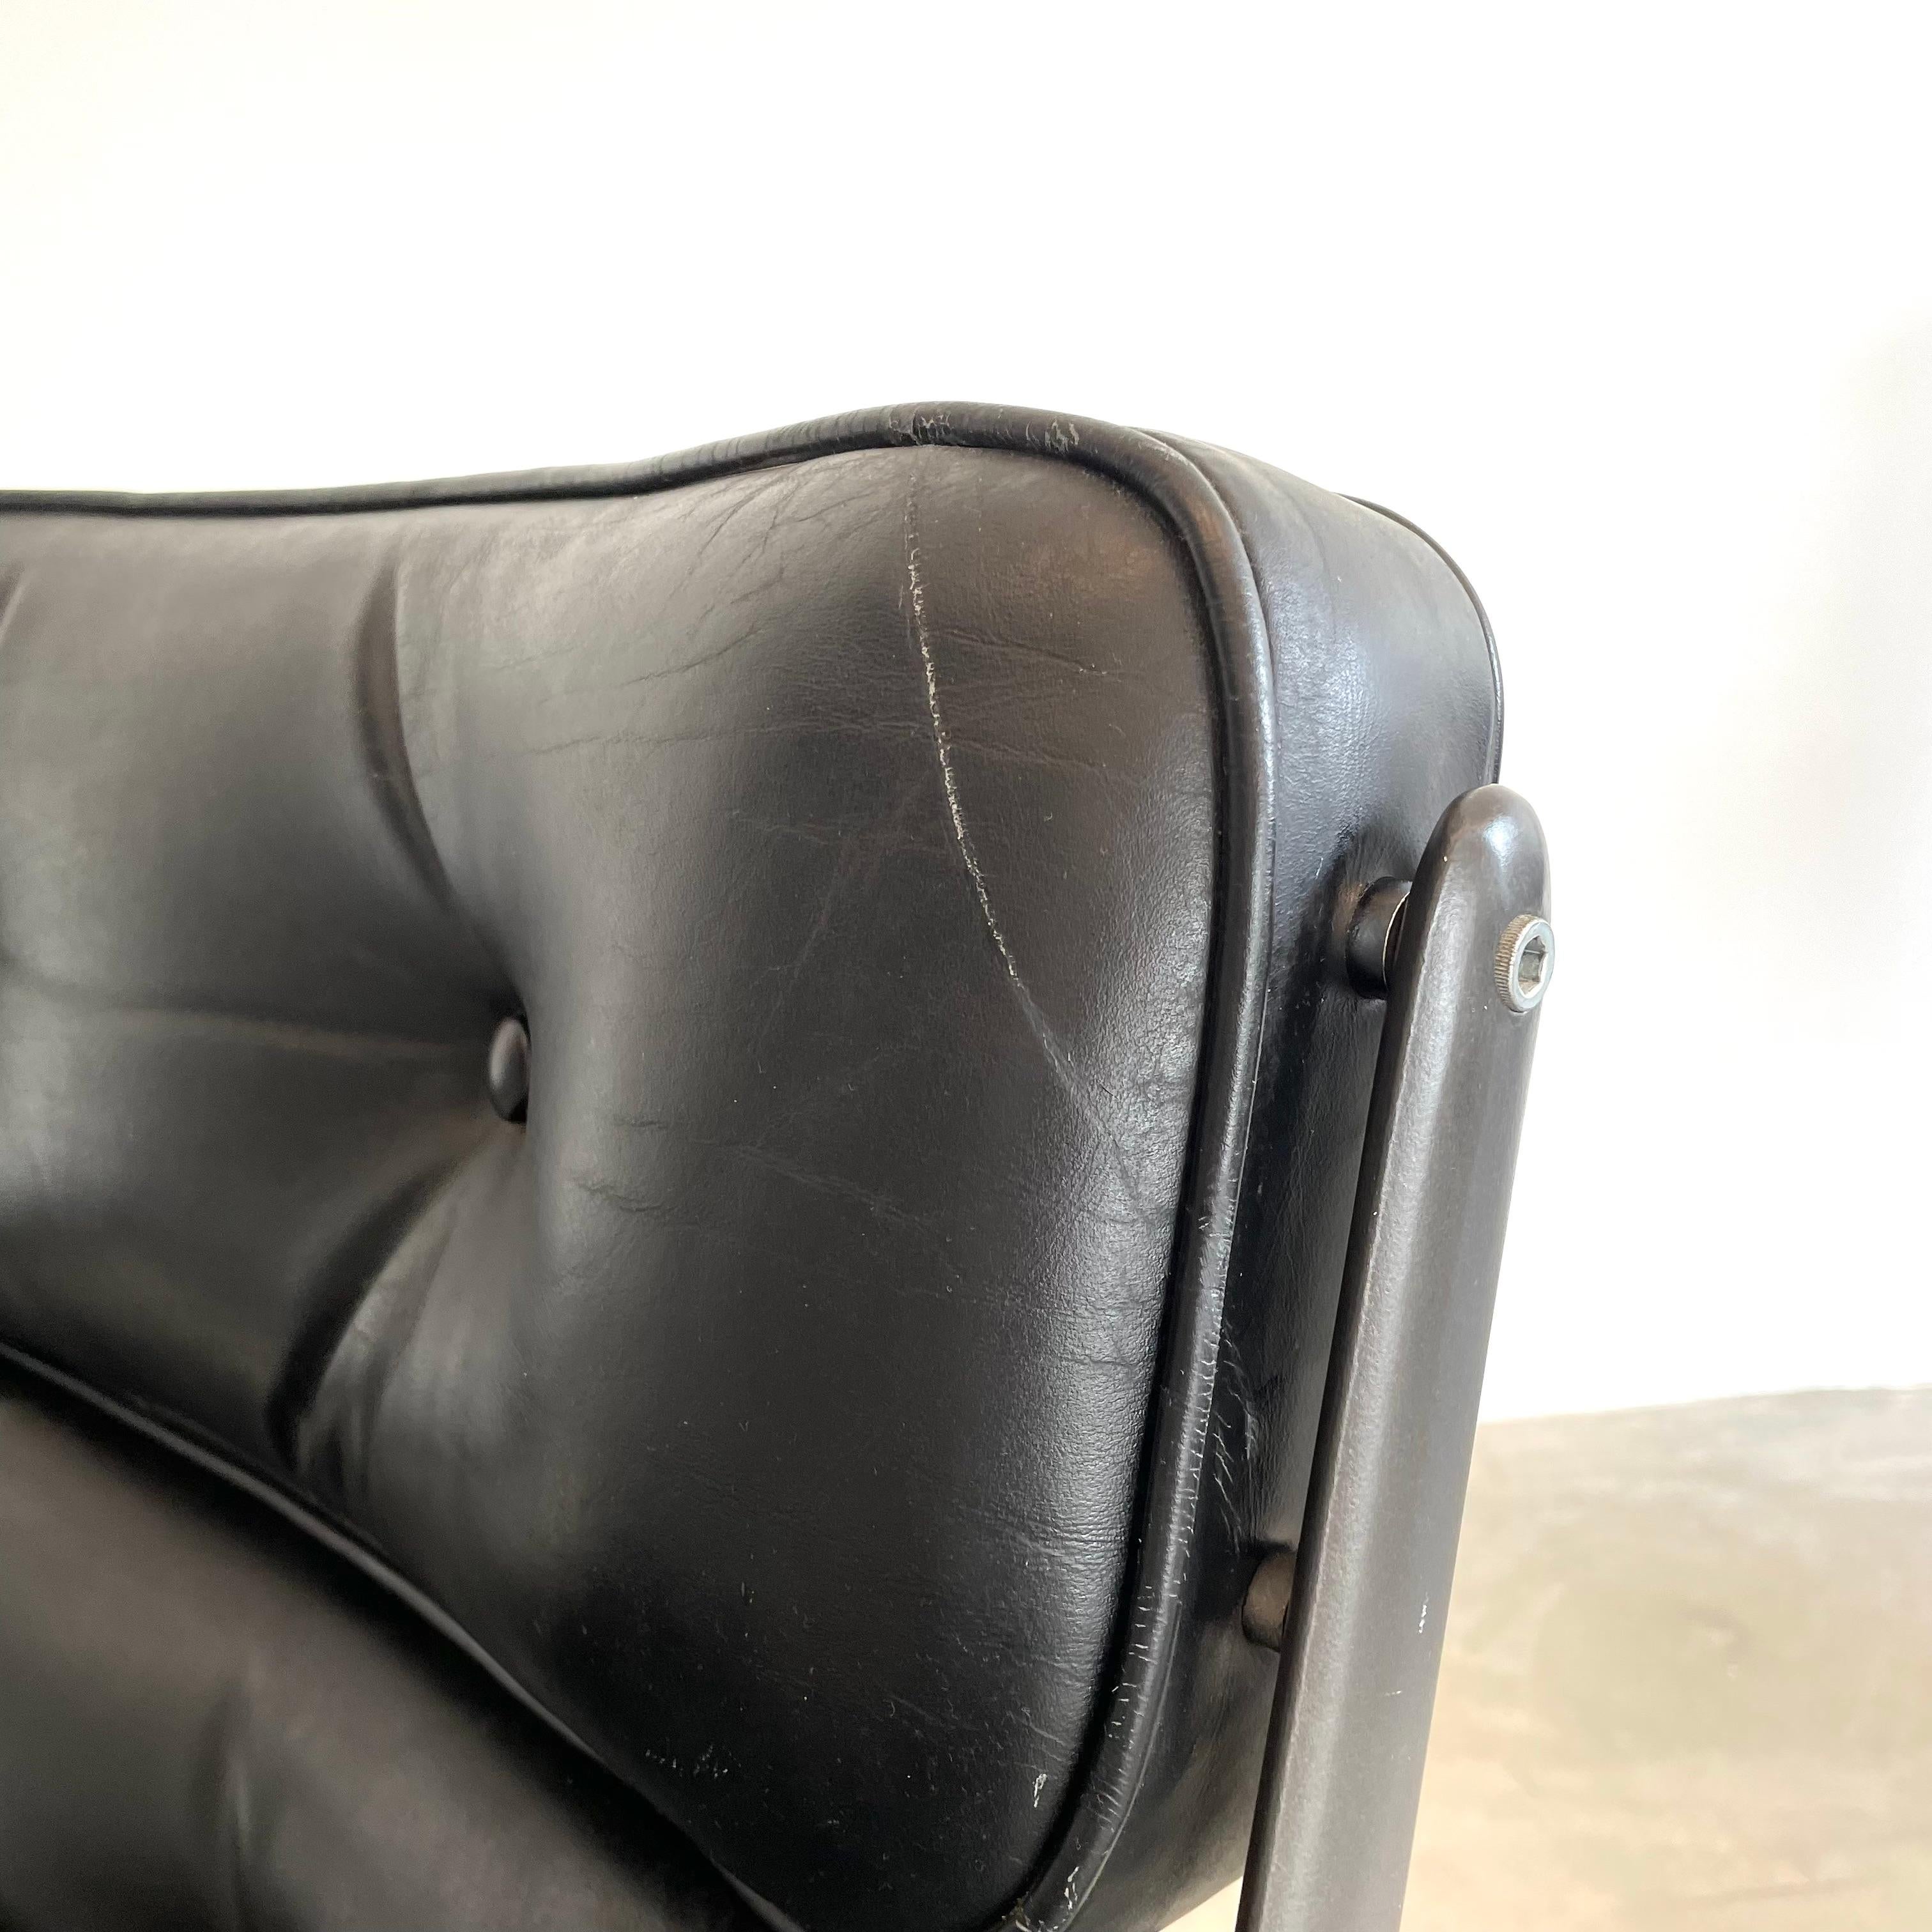 Eames Time Life Lobby Lounge Chair in Black Leather for Herman Miller, 1980s USA For Sale 3